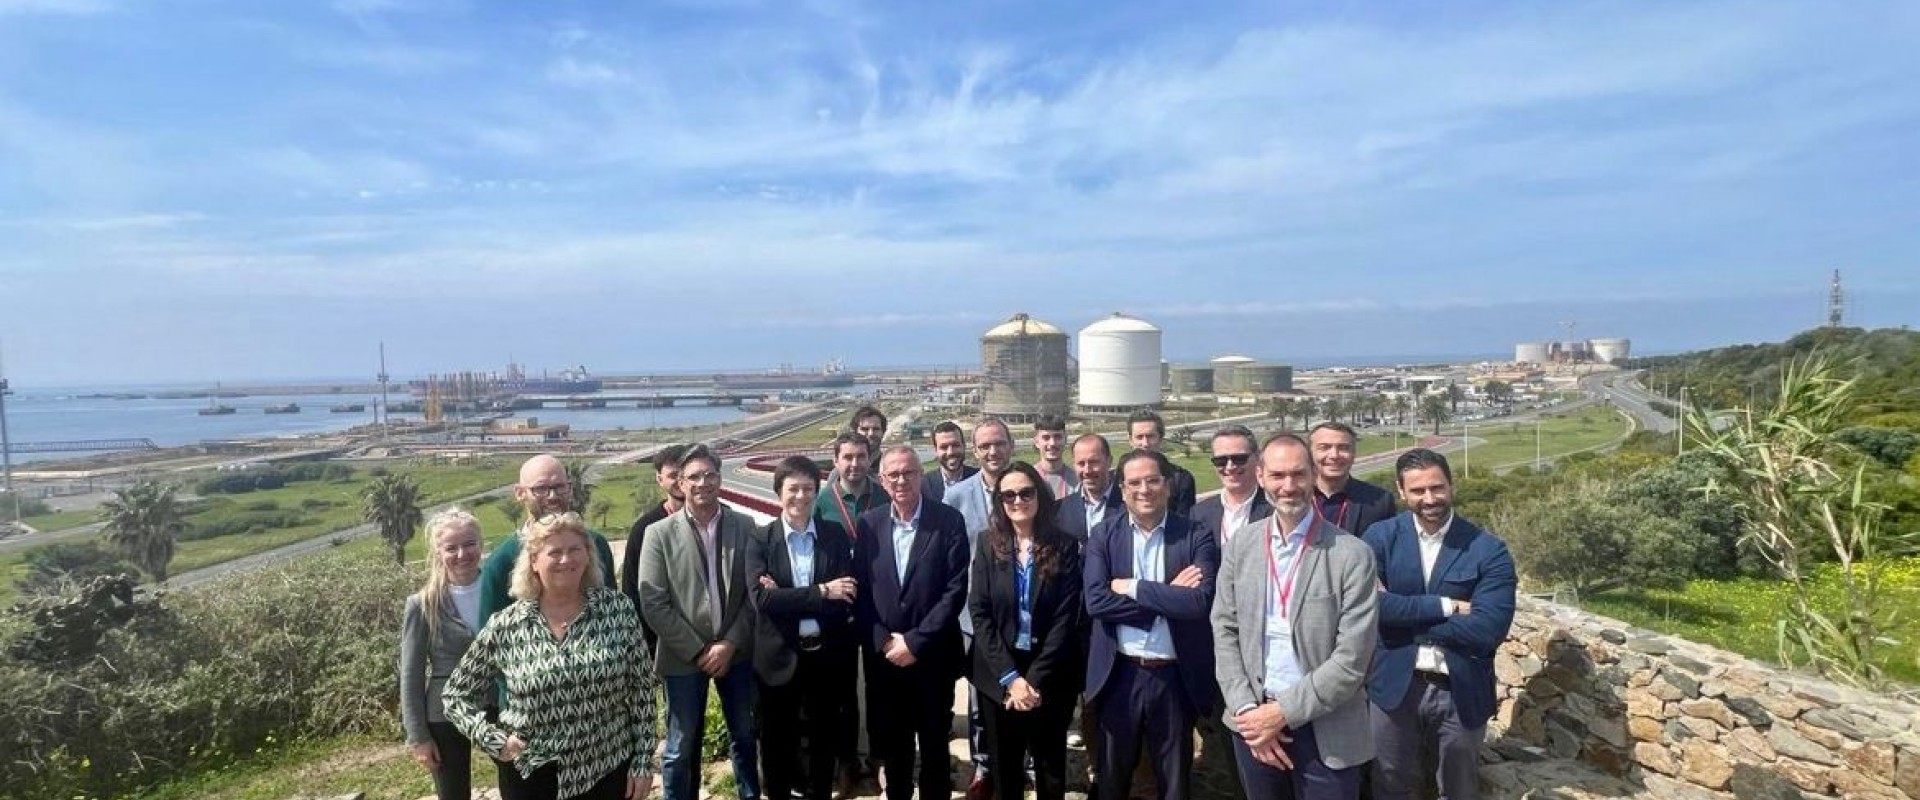 Nantes ‒ Saint Nazaire Port Accompanies a Regional Delegation to Portugal and Spain